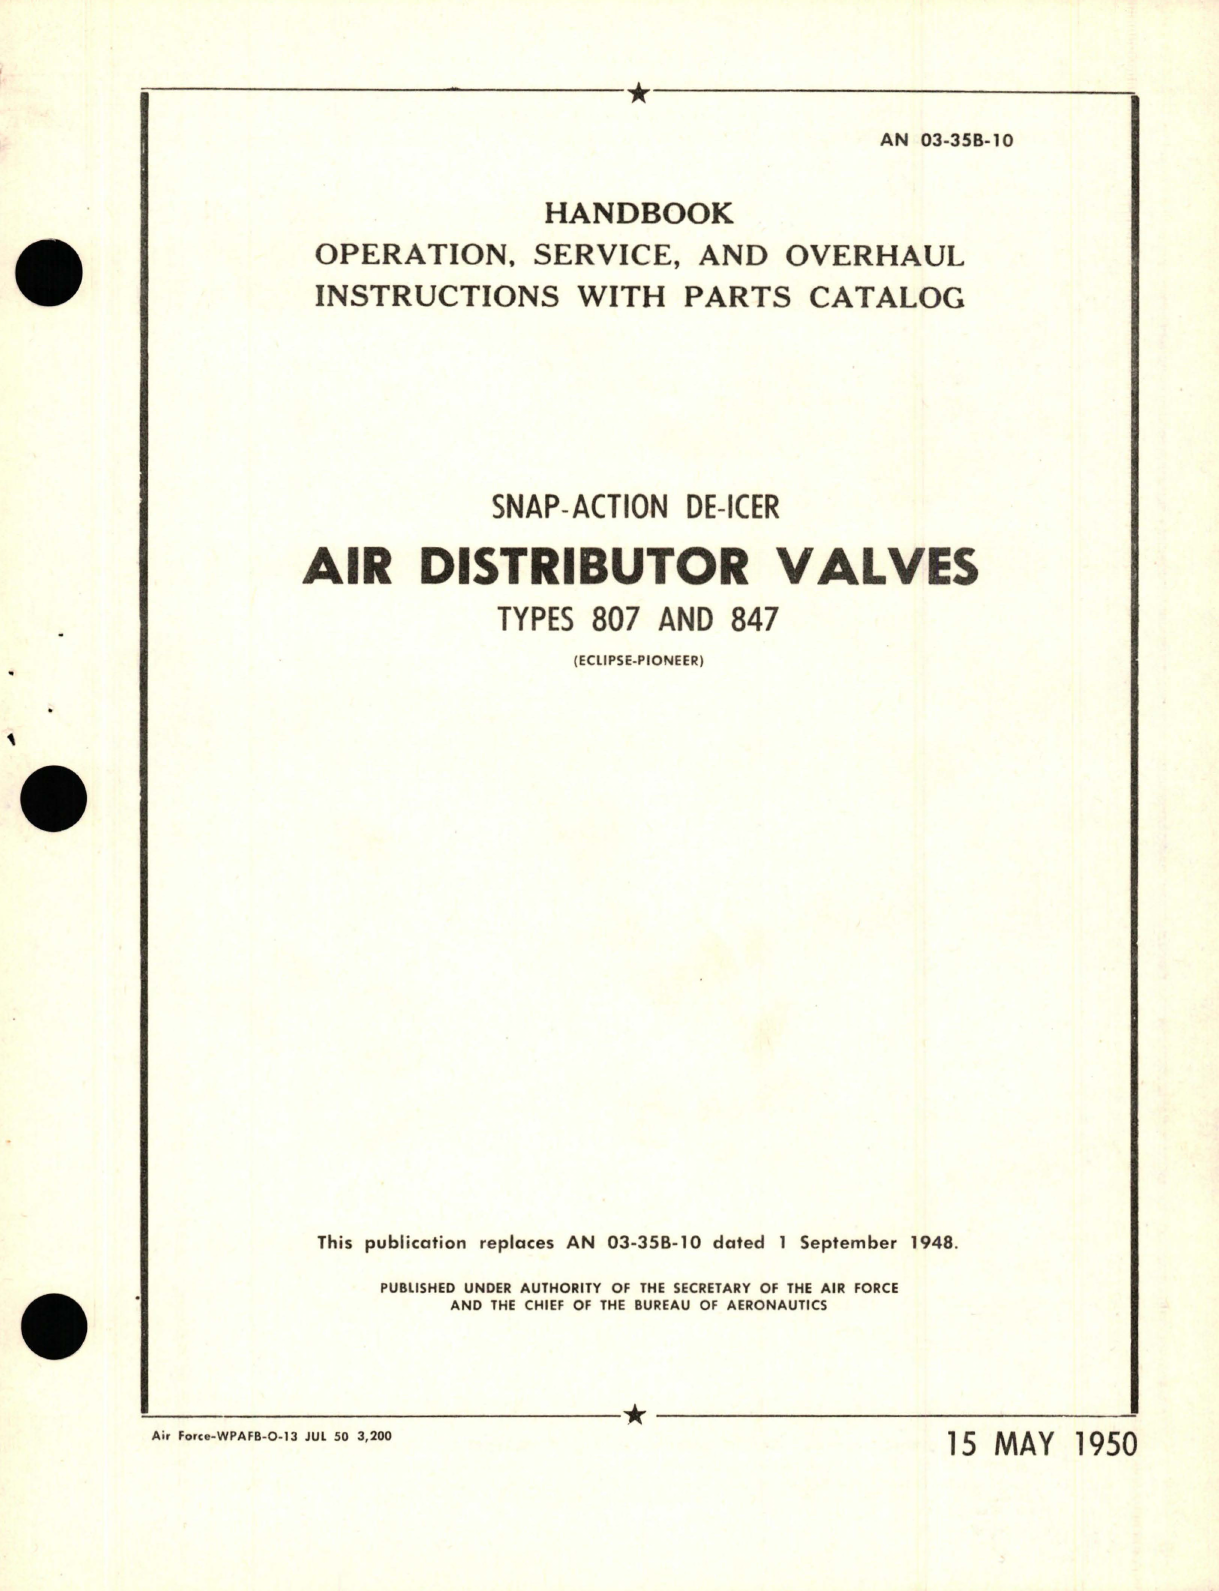 Sample page 1 from AirCorps Library document: Operation, Service, and Overhaul Instructions with Parts Catalog for Snap-Action De-Icer Air Distribution Valves - Types 807 and 847